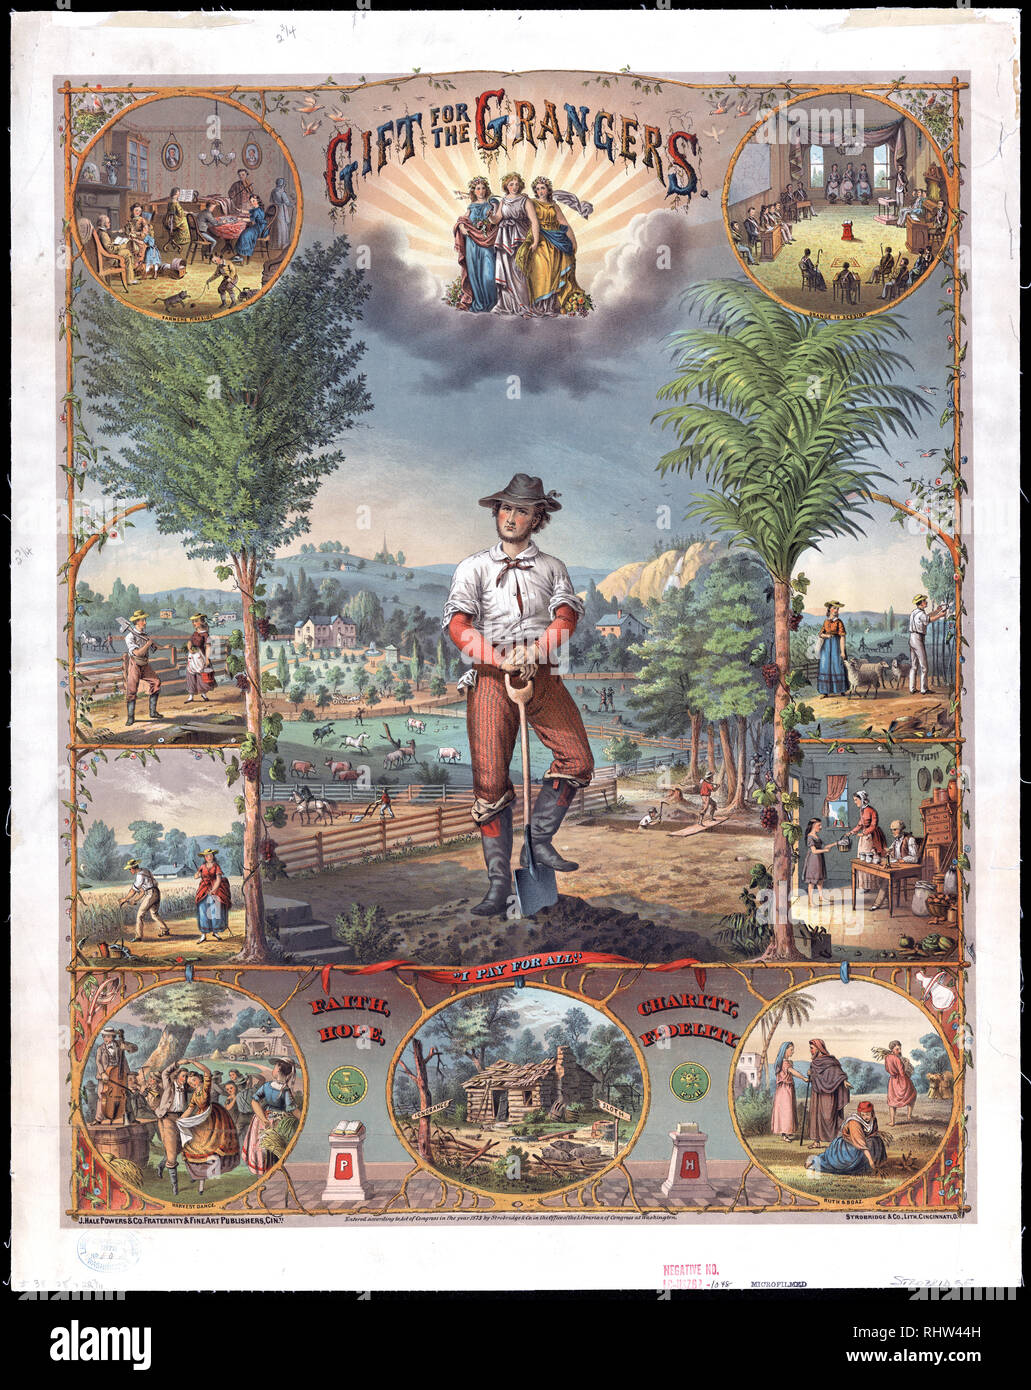 Promotional print for Grange members showing scenes of farming and farm life - farmer in a field - ca. 1873 Stock Photo